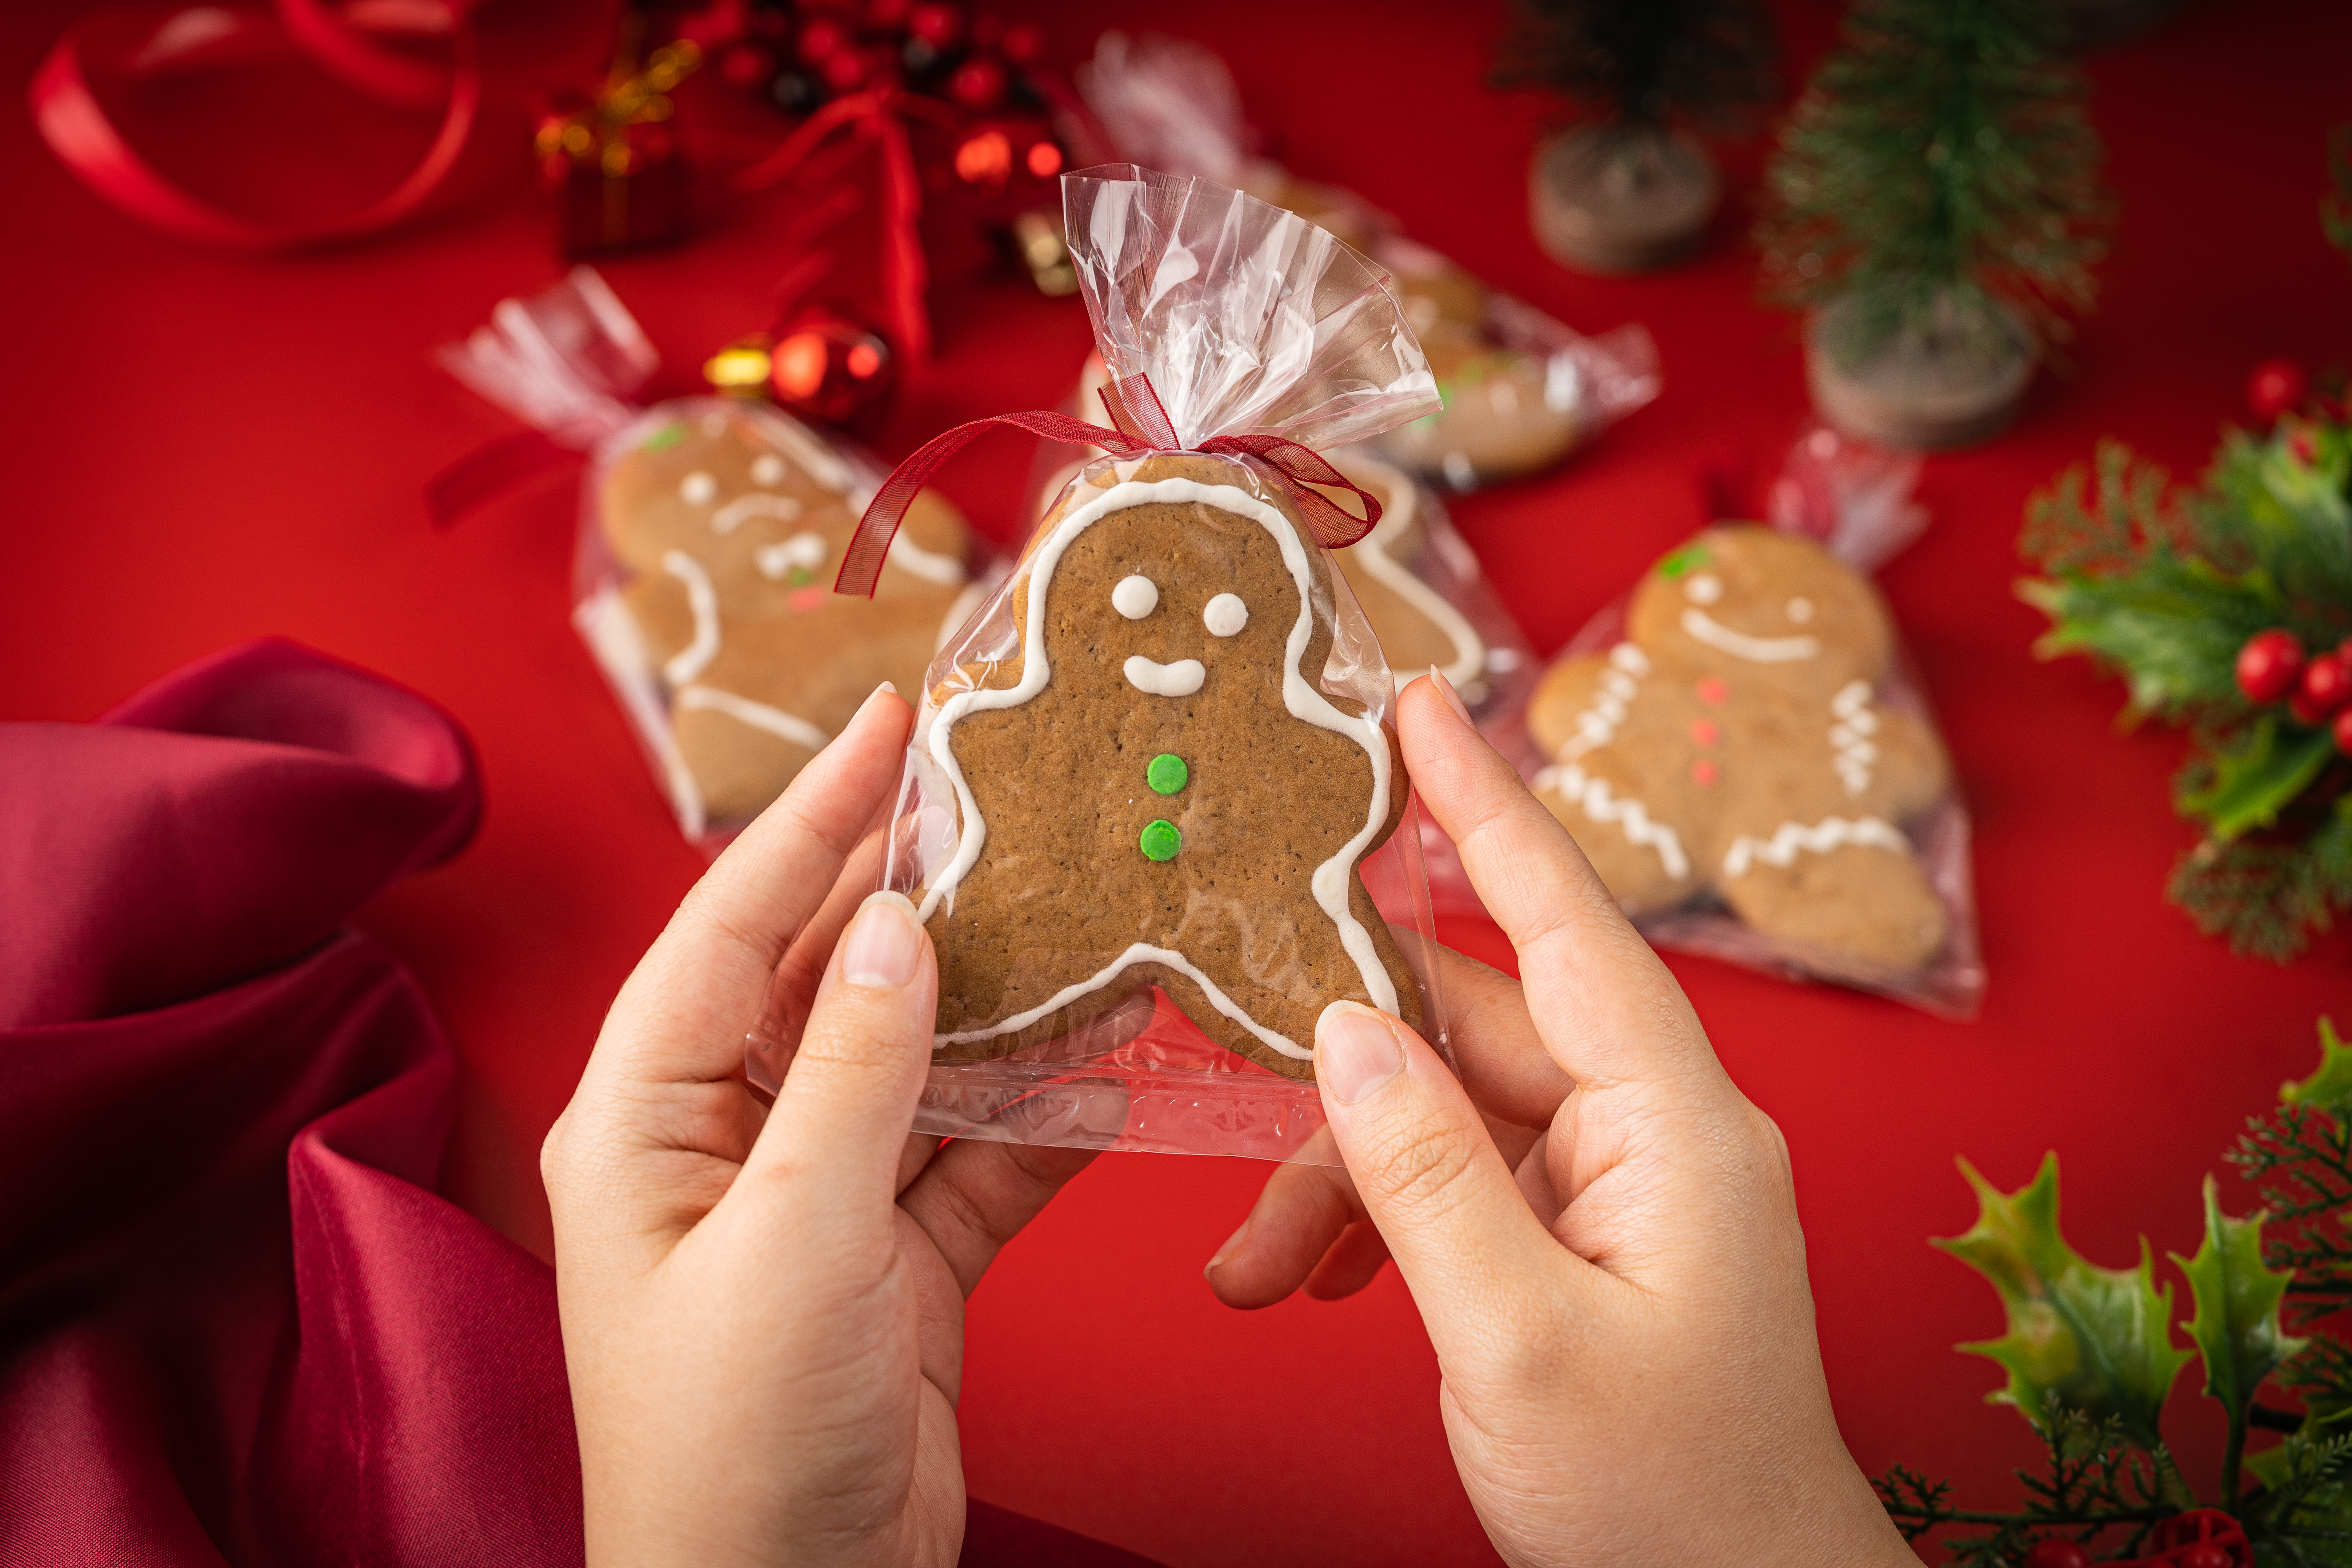 Who would forget about bringing gingerbread man to the Christmas family gathering?